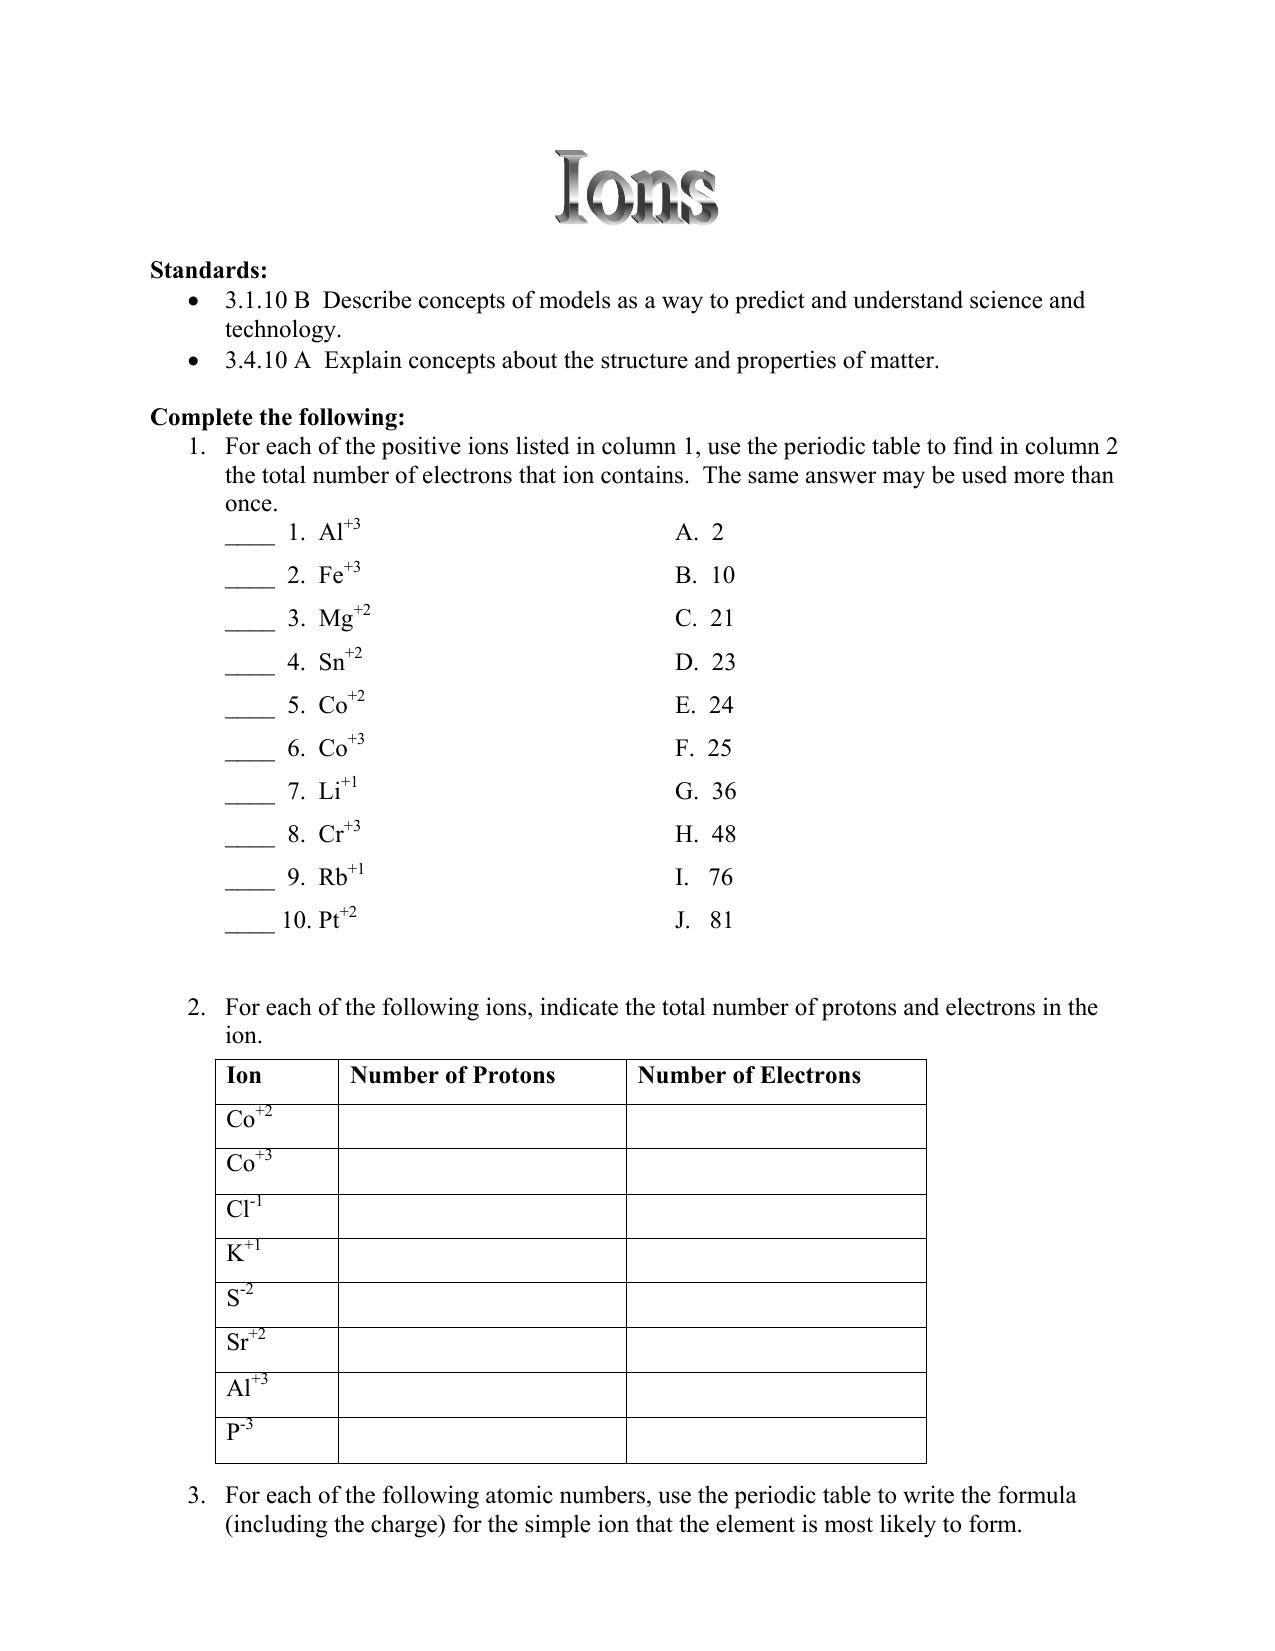 cp-chemistry-worksheet-ions